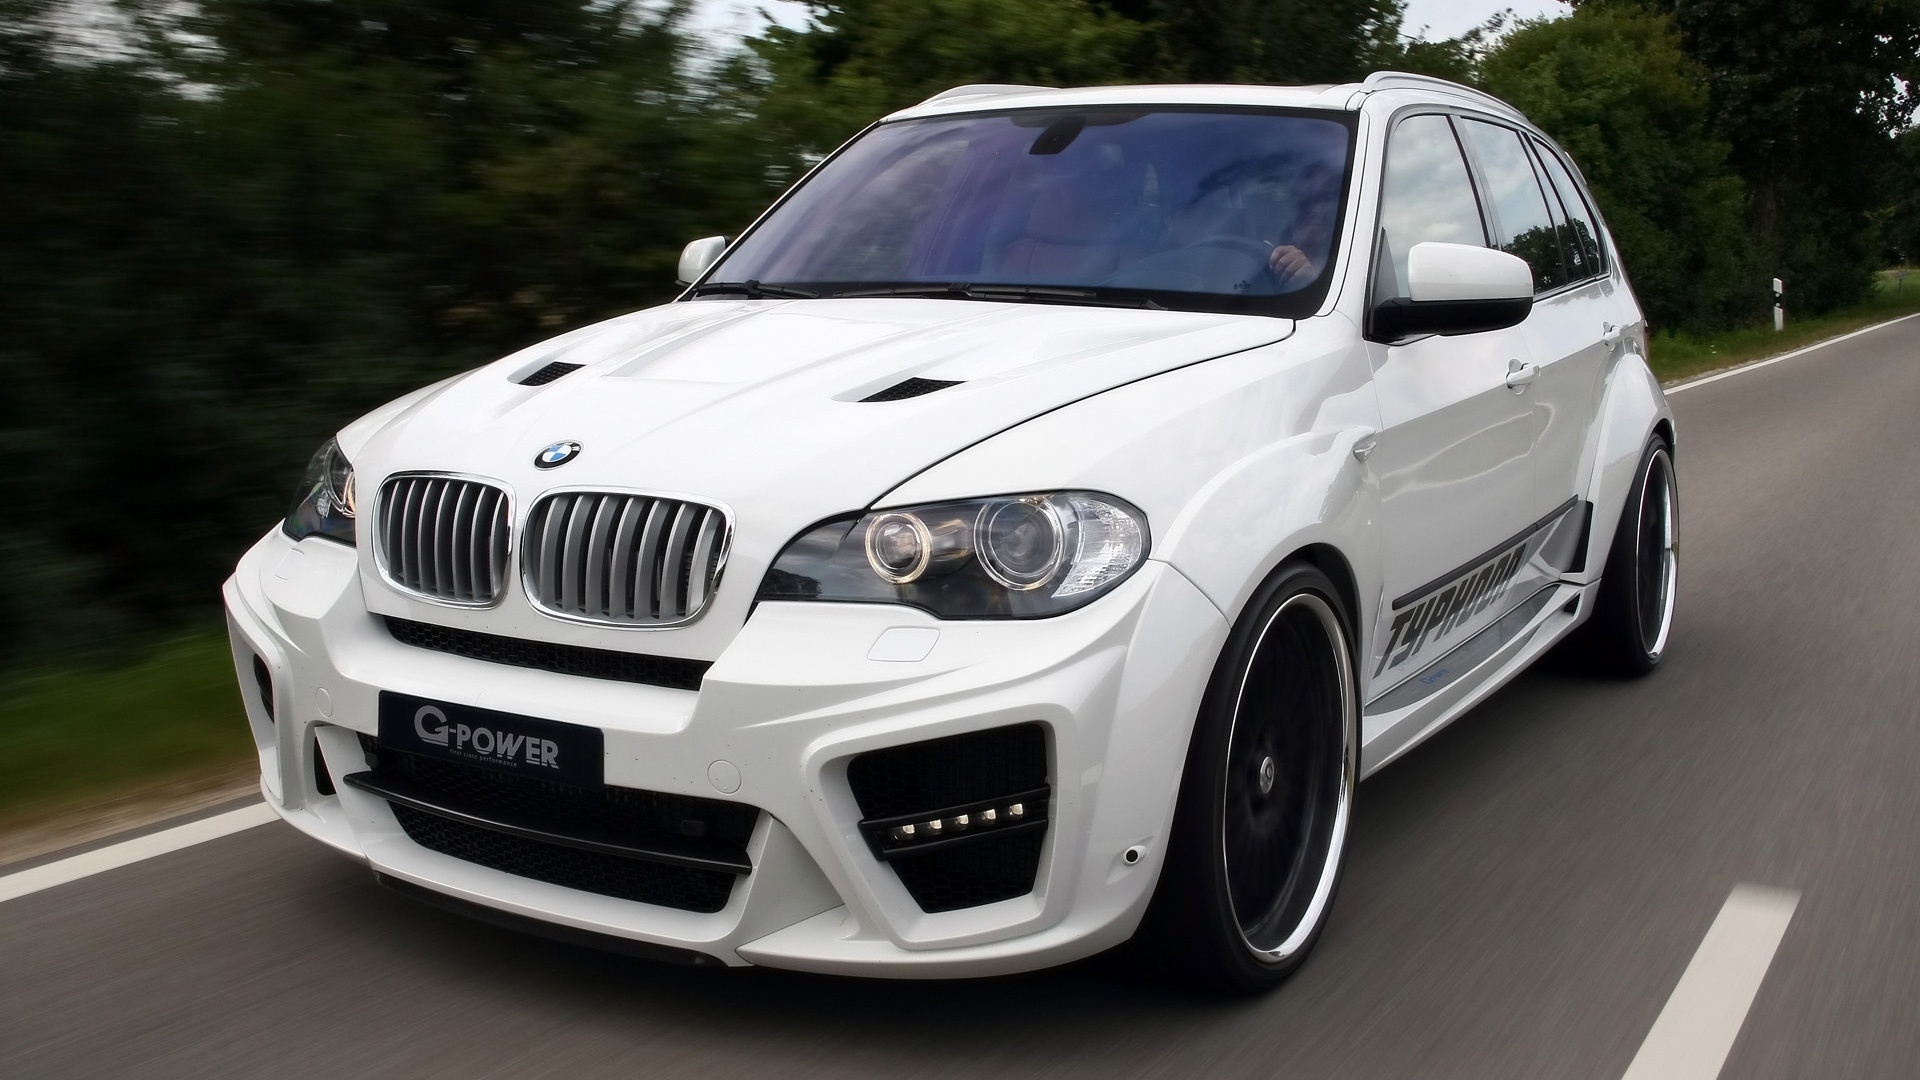 BMW X5 Typhoon RS 2010 G Power for 1920 x 1080 HDTV 1080p resolution